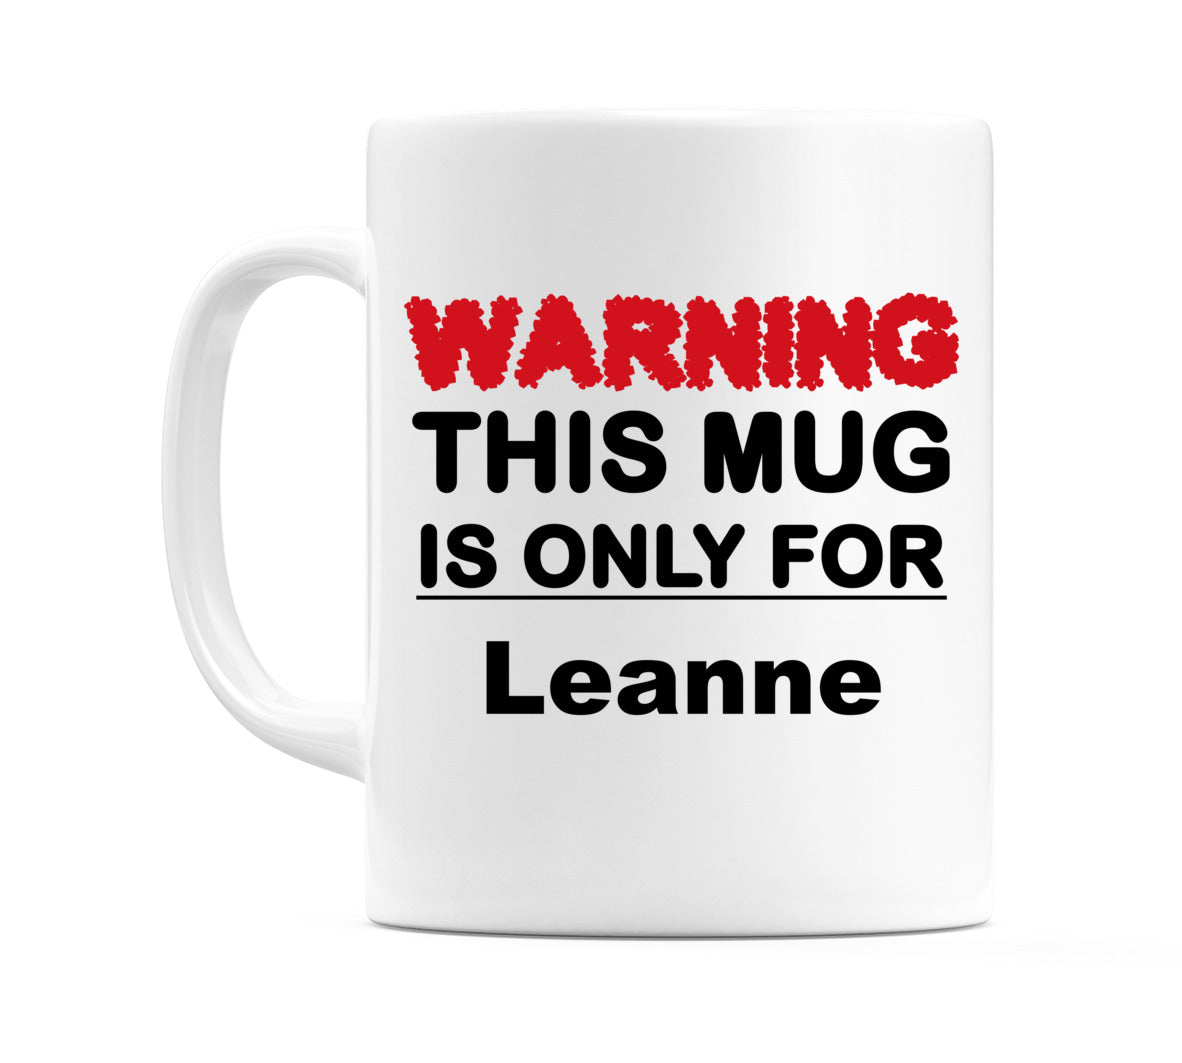 Warning This Mug is ONLY for Leanne Mug